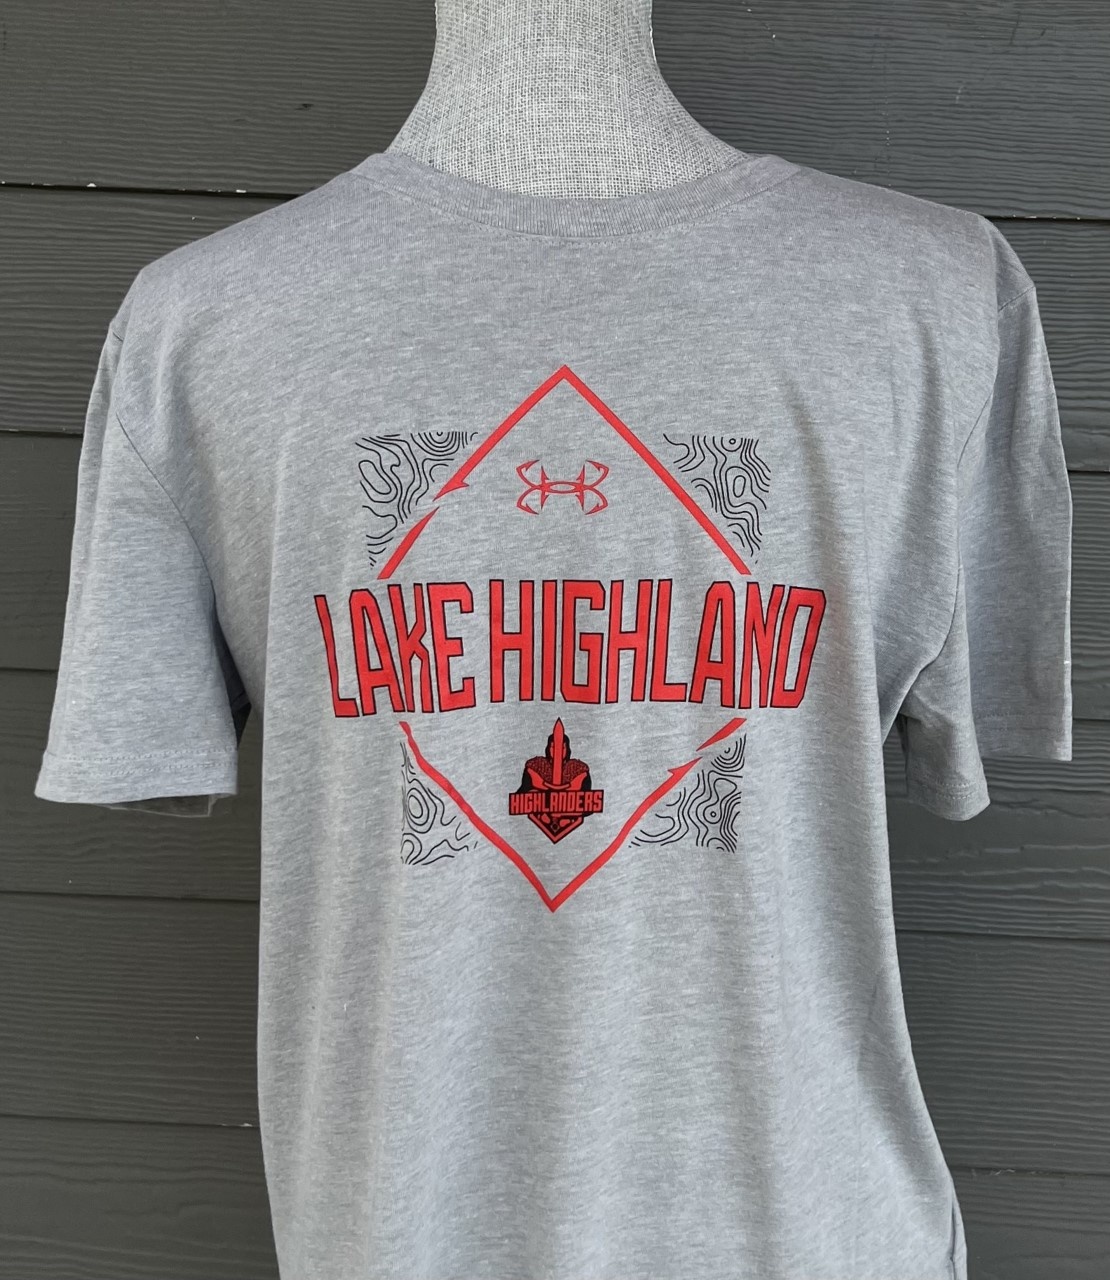 UA Youth SS Cotton Tee Lake Highland Over Mascot in Diamond 22